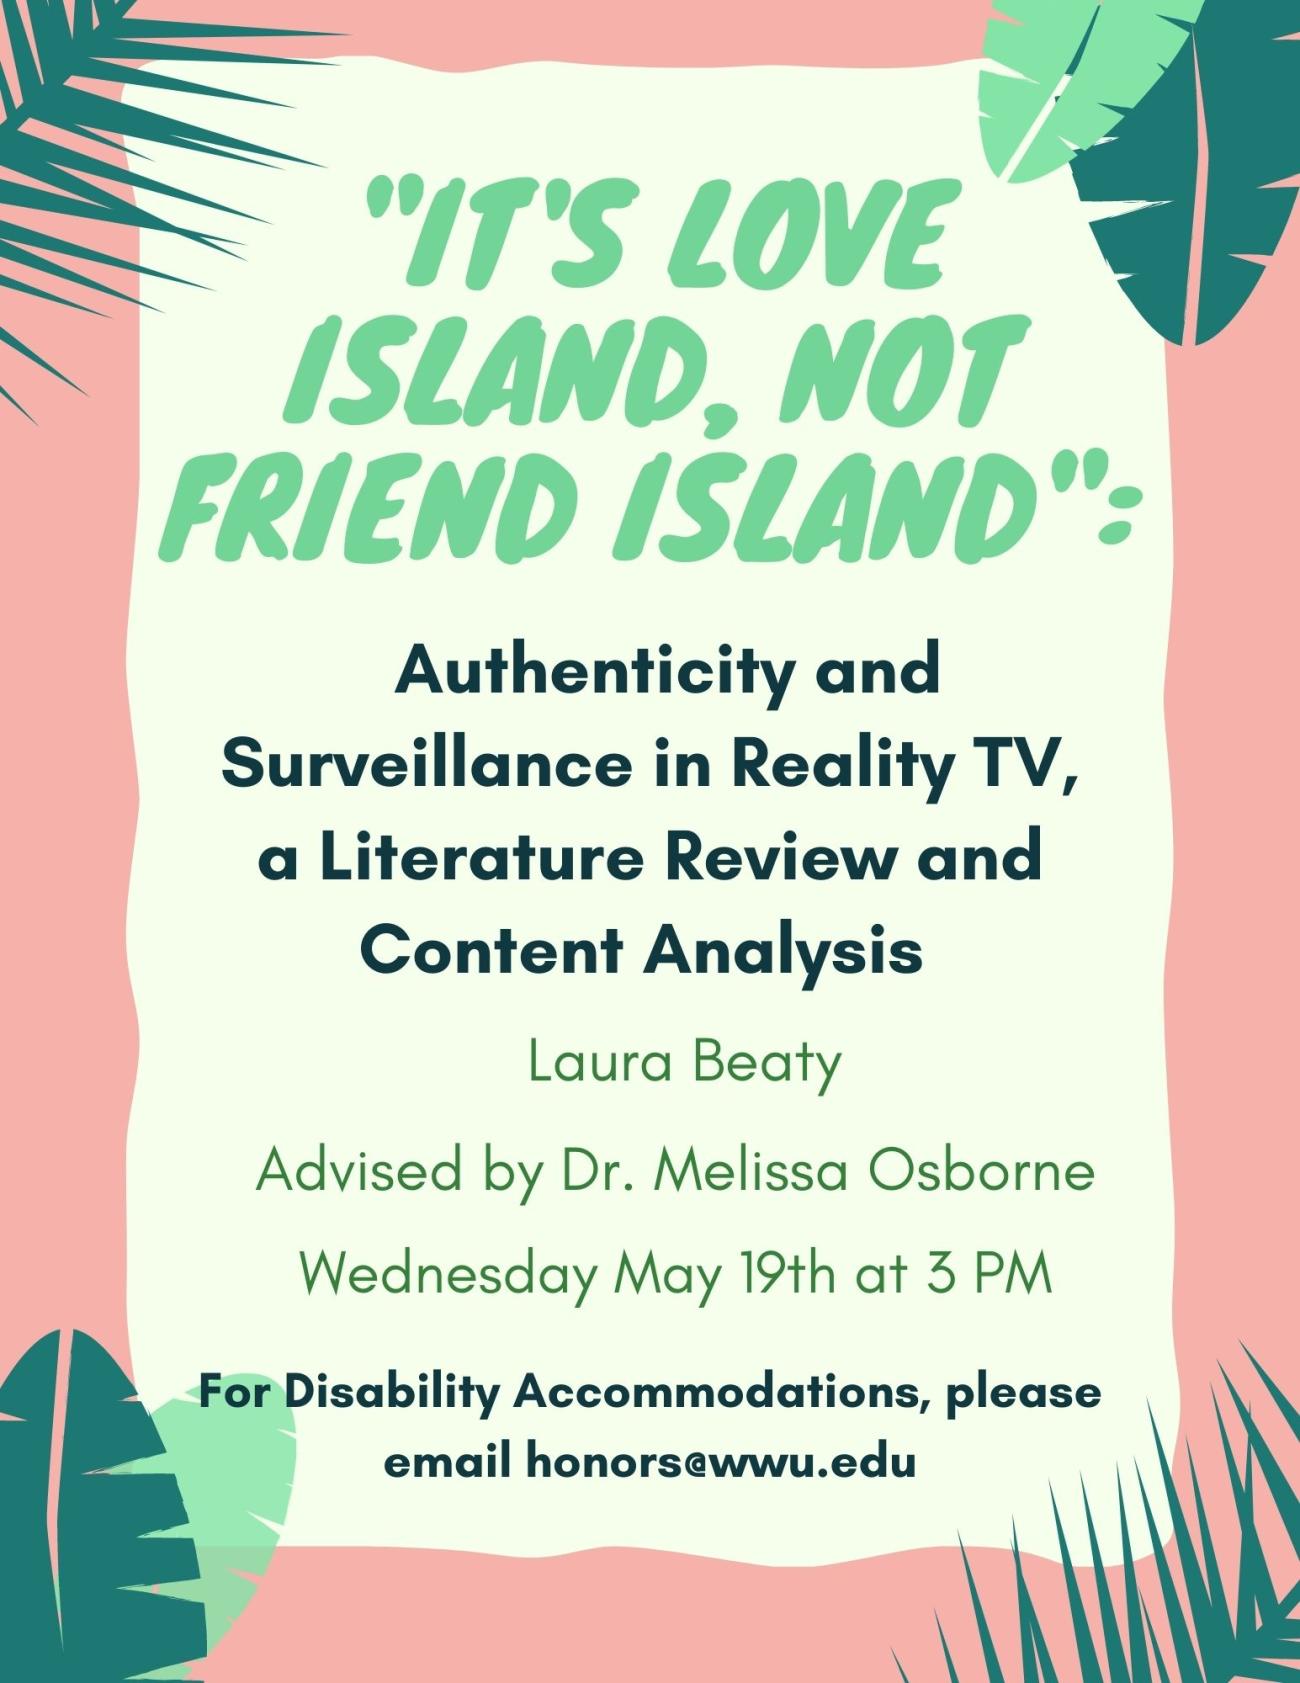 Cartoon images of tropical foliage overlay a pink border. On a light green background, text reads: "It's Love Island, Not Friend Island": Authenticity and Surveillance in Reality TV, a Literature Review and Content Analysis. Laura Beaty, advised by Dr. Melissa Osborne. Wednesday May 19th at 3 PM. For Disability Accommodations, please email honors@wwu.edu". 